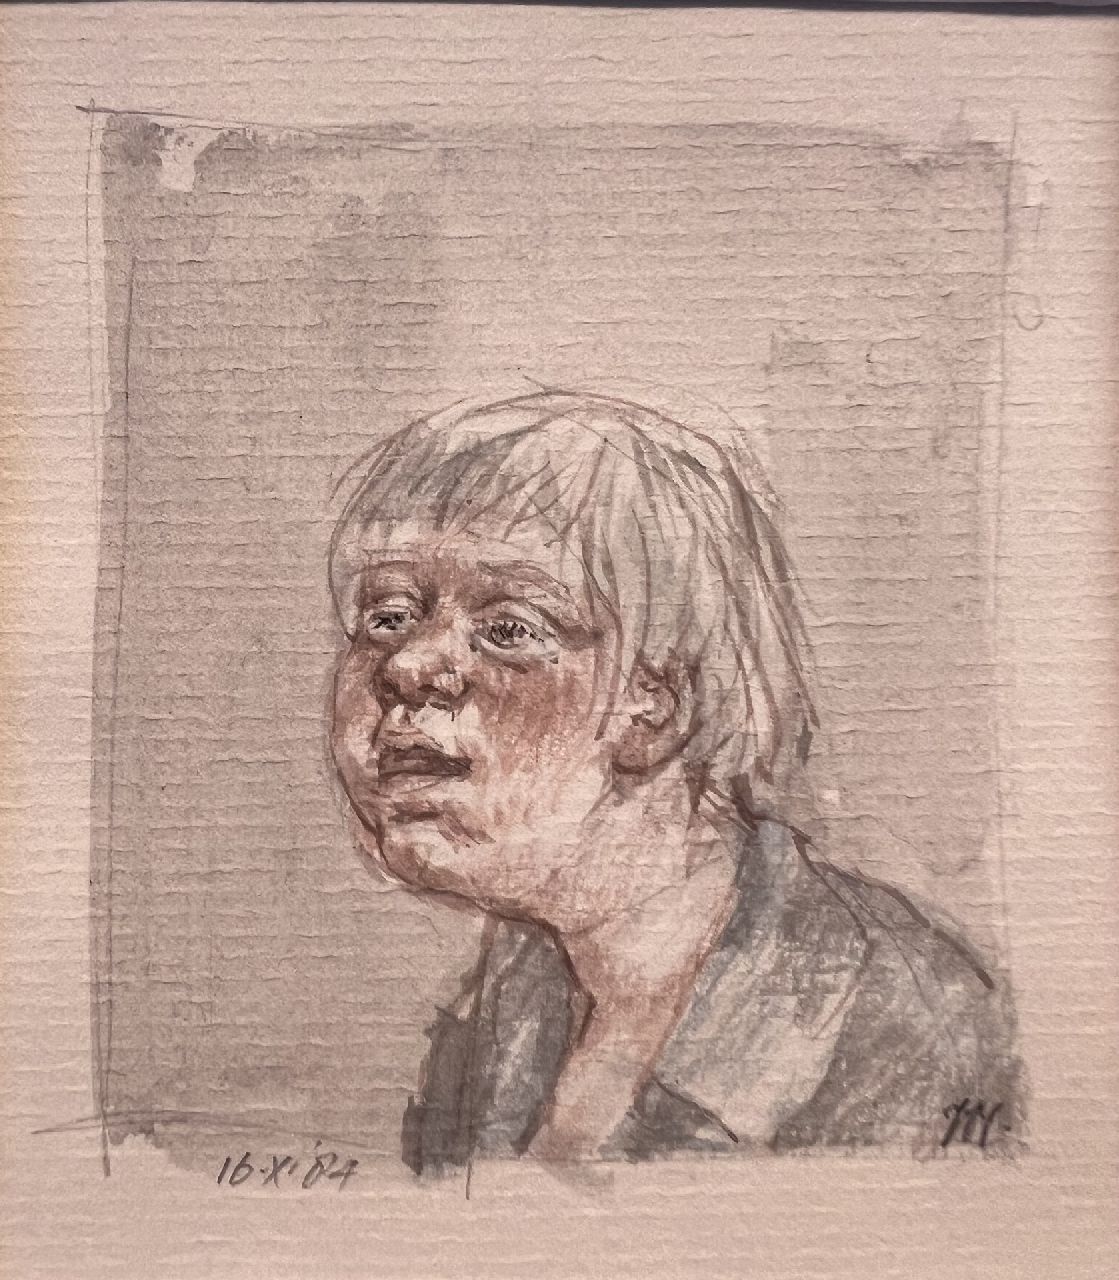 Vos P.A.C.A.  | Petrus Antonius Carolus Augustinus 'Peter' Vos | Watercolours and drawings offered for sale | Portrait of a boy, pencil and watercolour on paper 11.7 x 10.1 cm, signed l.r. (in pencil) and dated 16.X.'84